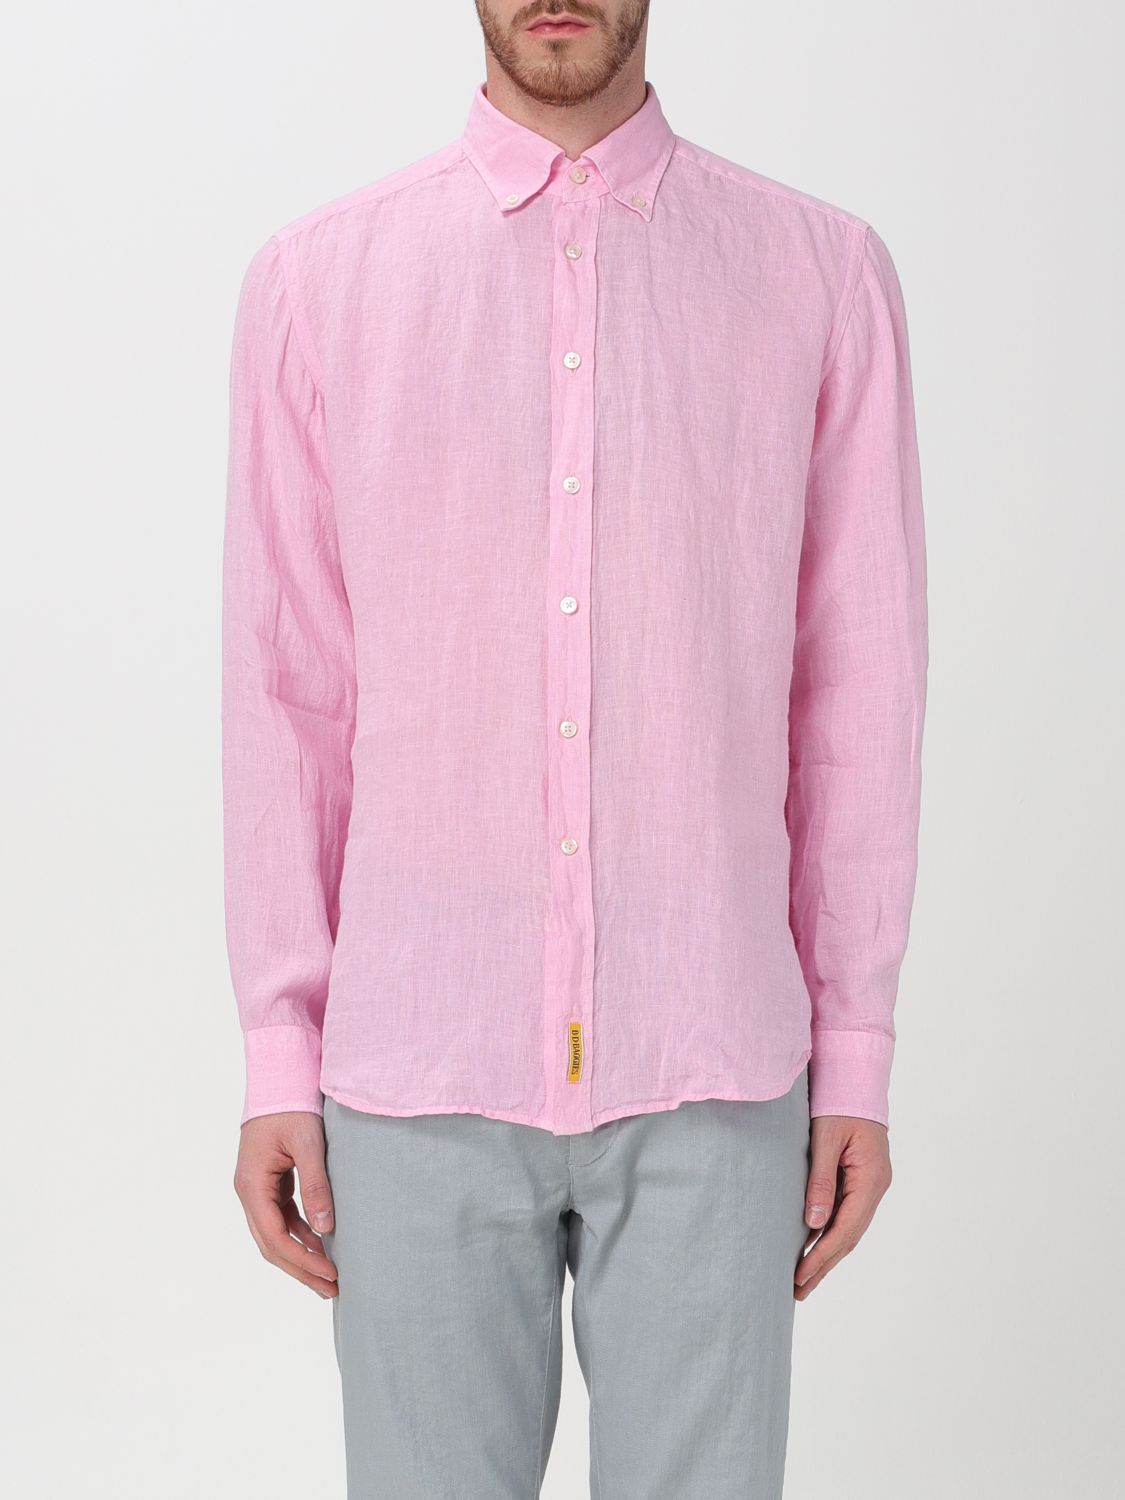 Shop An American Tradition Shirt  Men Color Pink